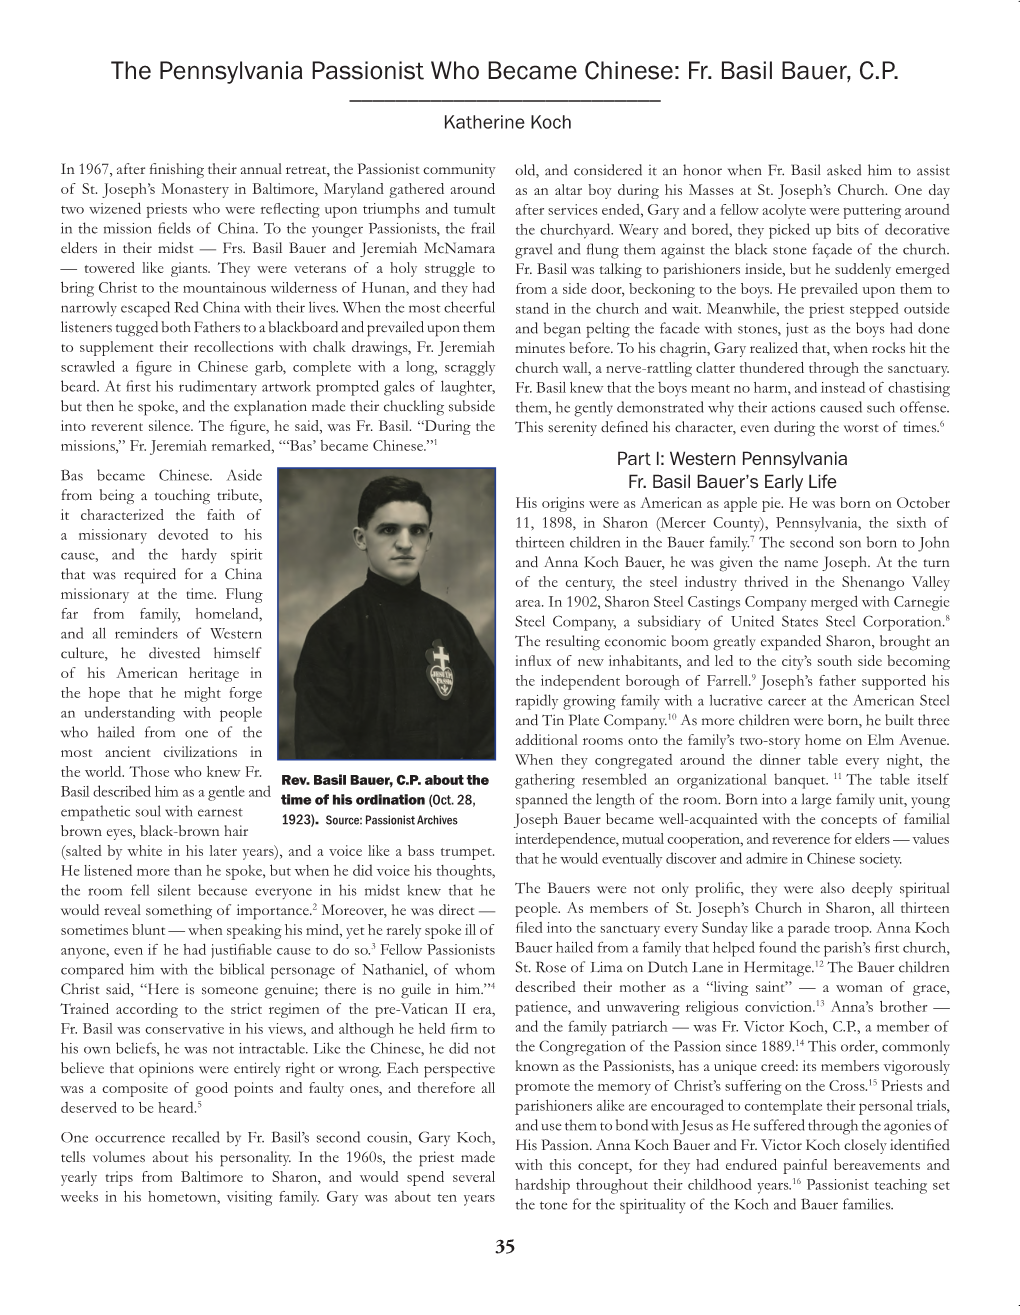 The Pennsylvania Passionist Who Became Chinese: Fr. Basil Bauer, C.P